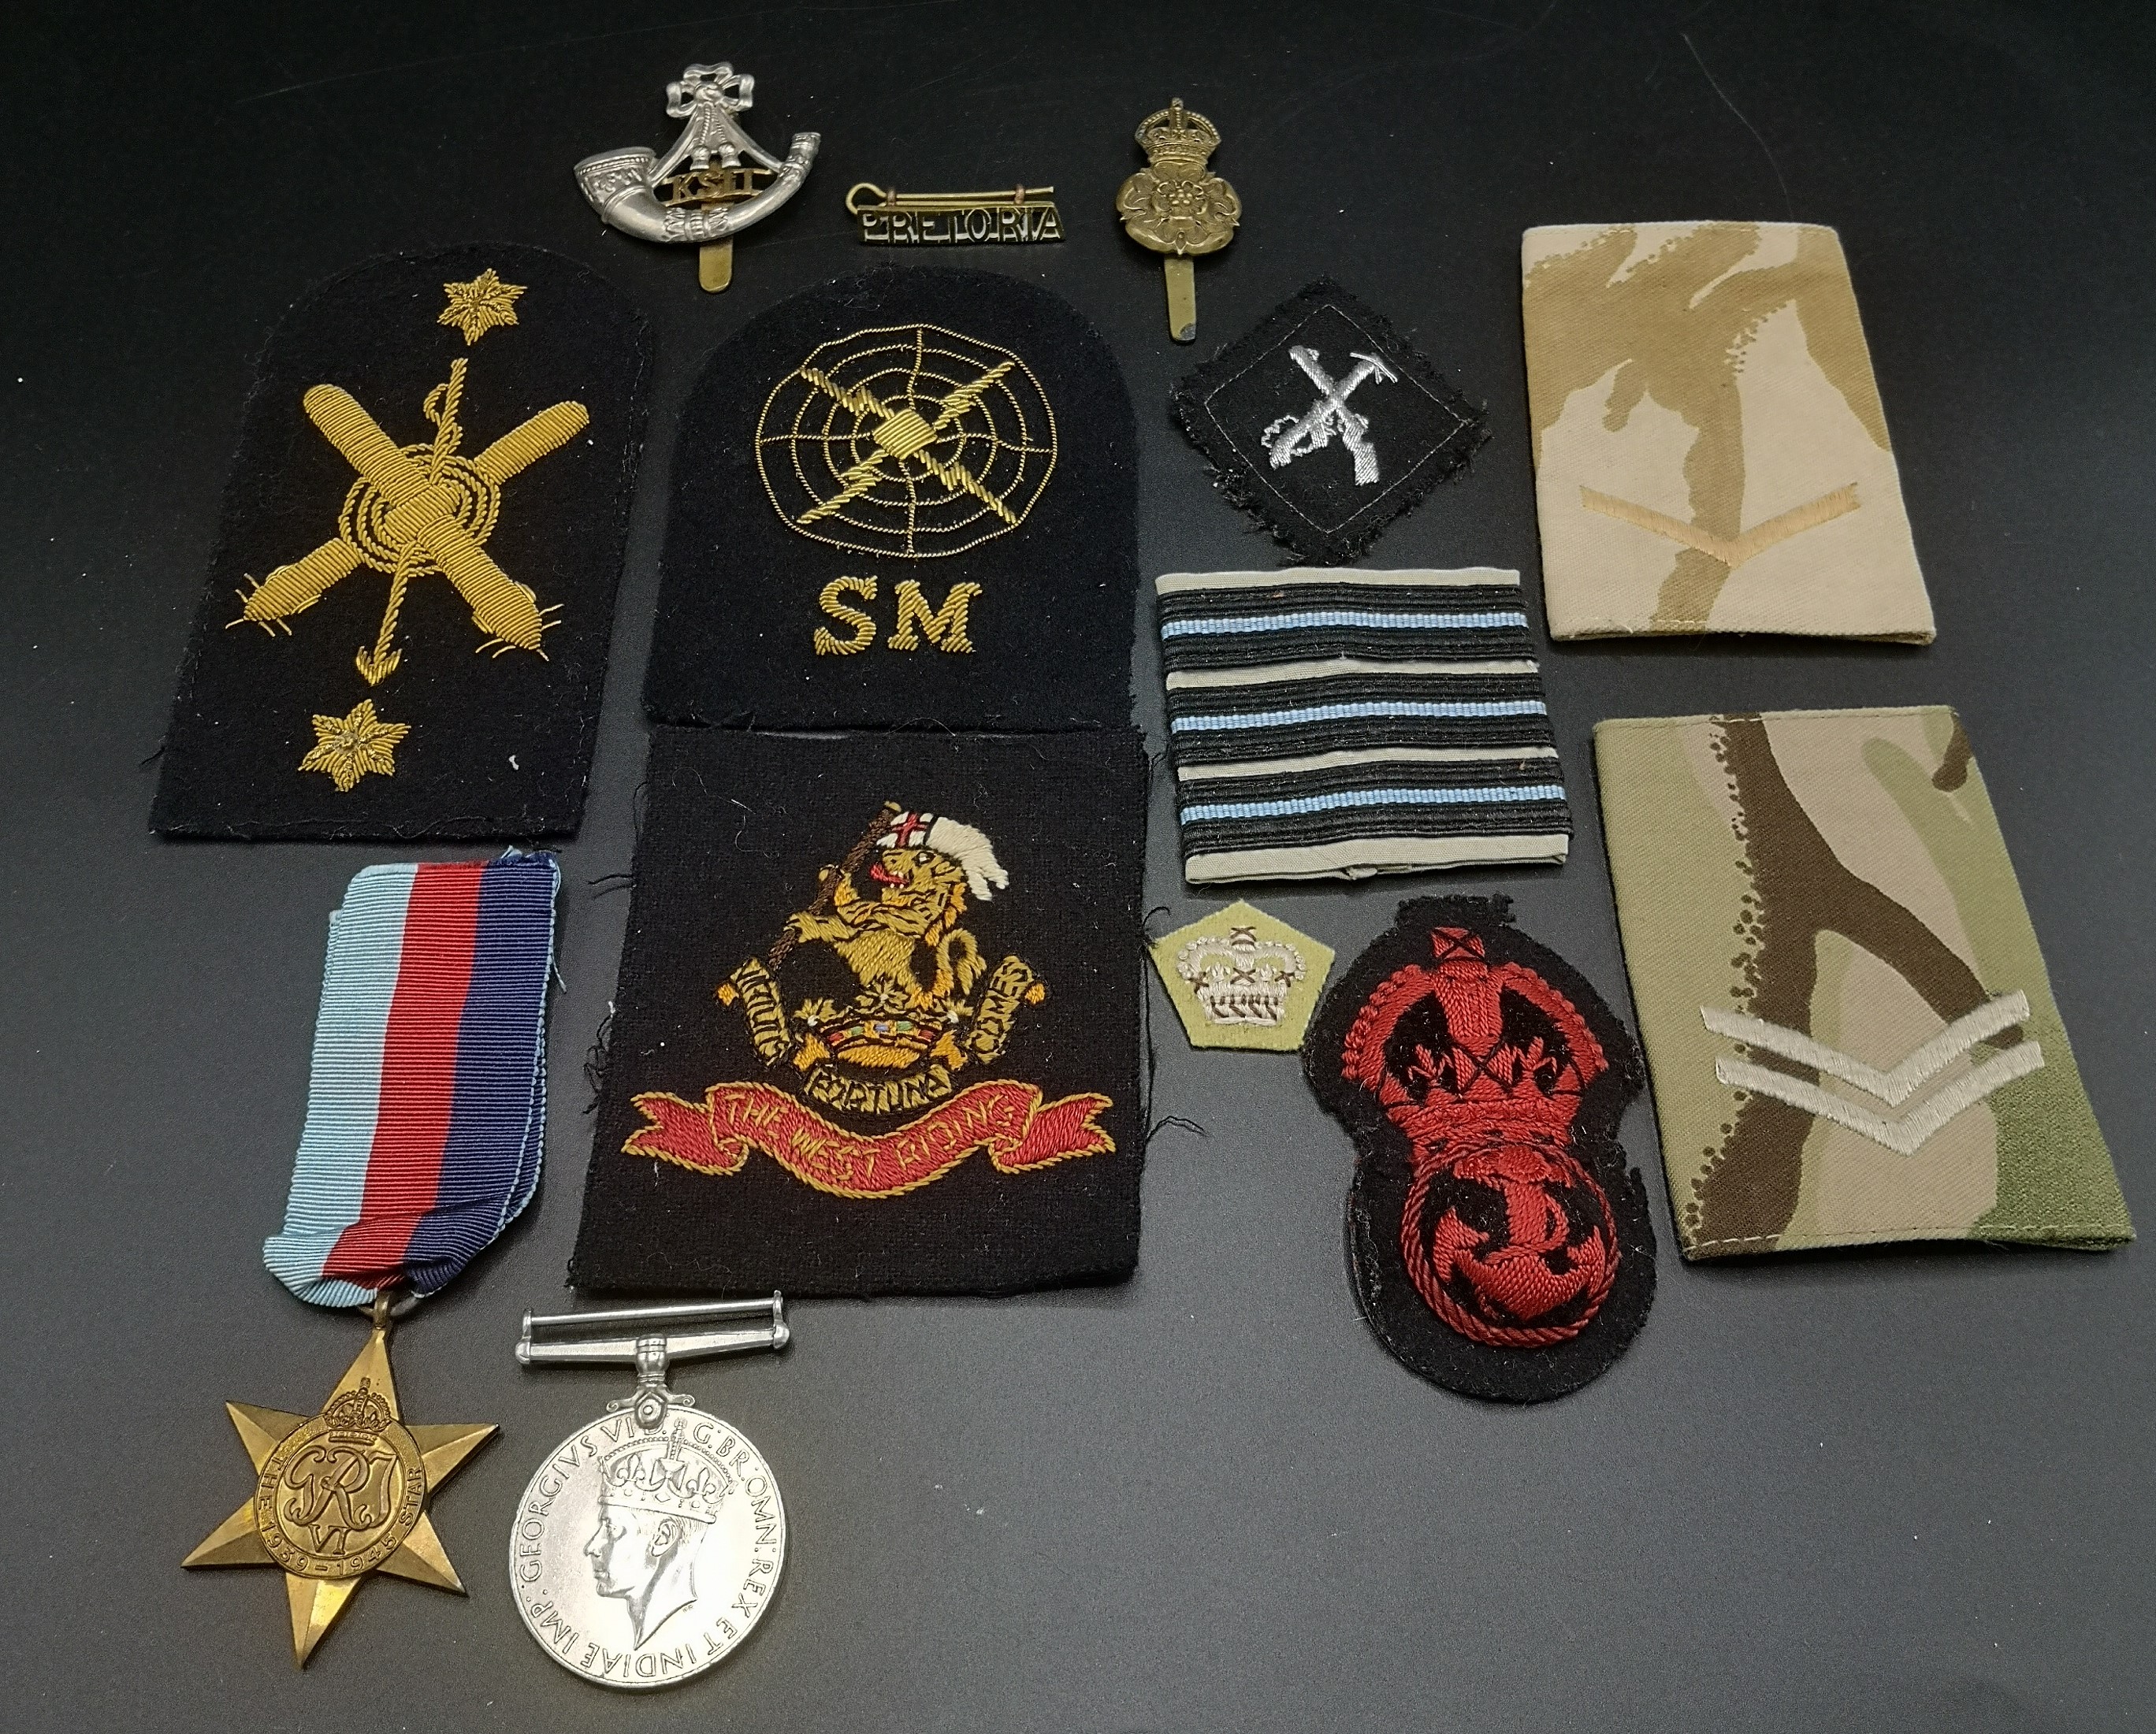 Two WWII medals together with a quantity of military patches and badges - Image 3 of 3